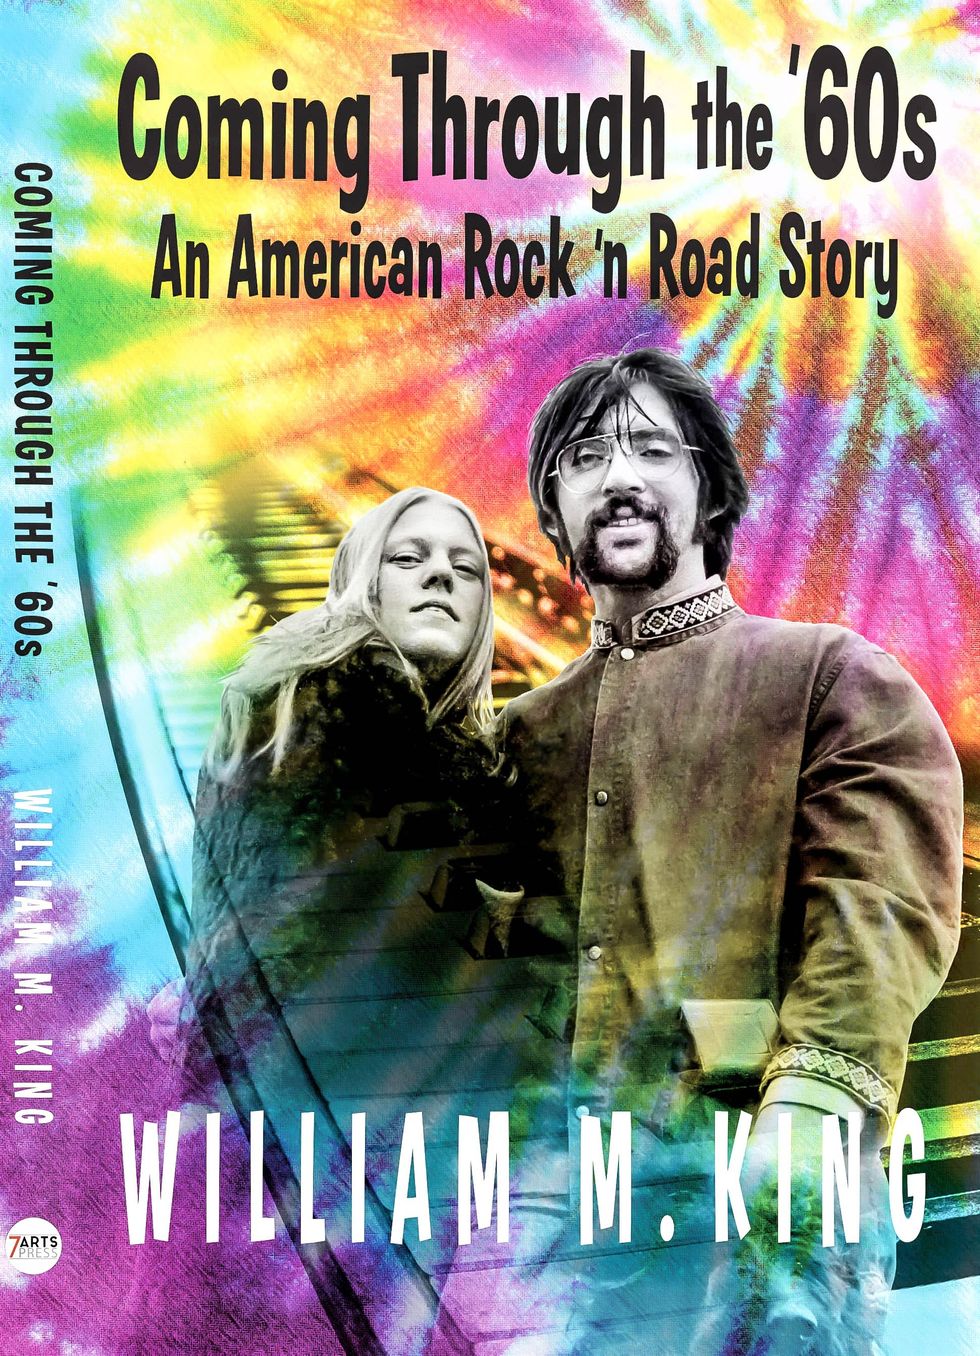  Excerpts From Bill King's 'An American Rock 'n Road Story'